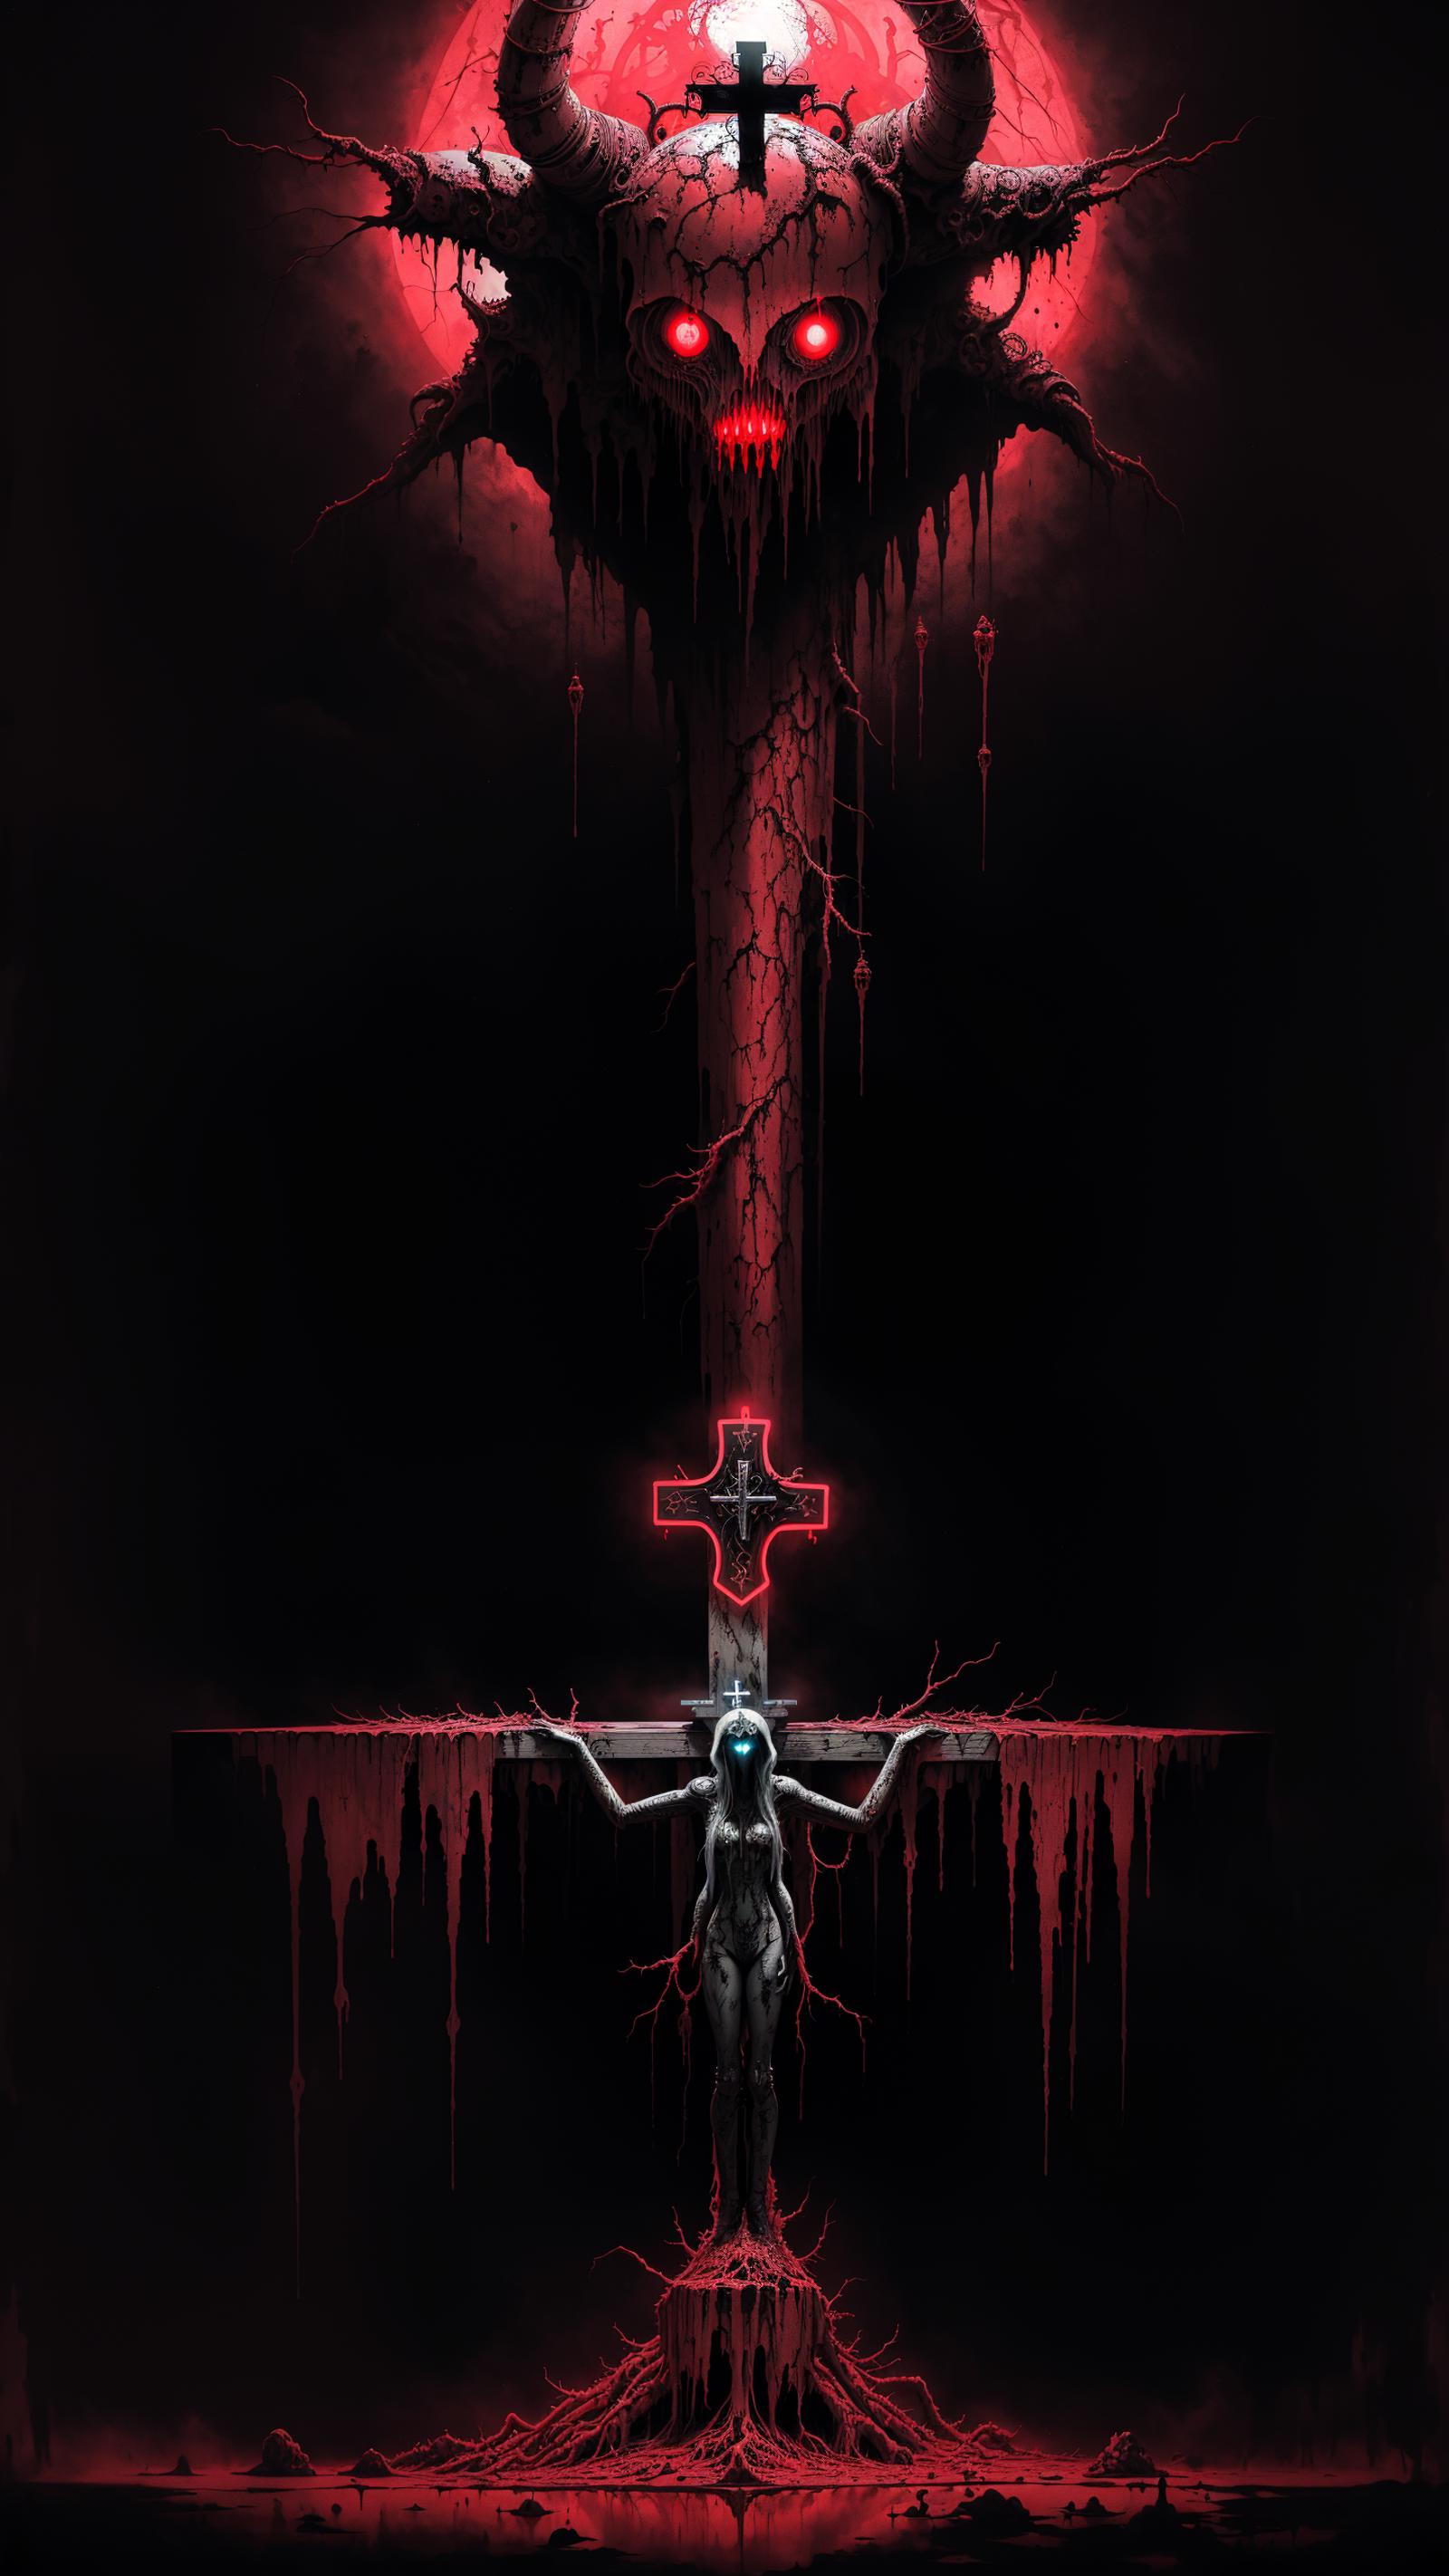 A woman standing in front of a large, bloody cross with red drops of blood.